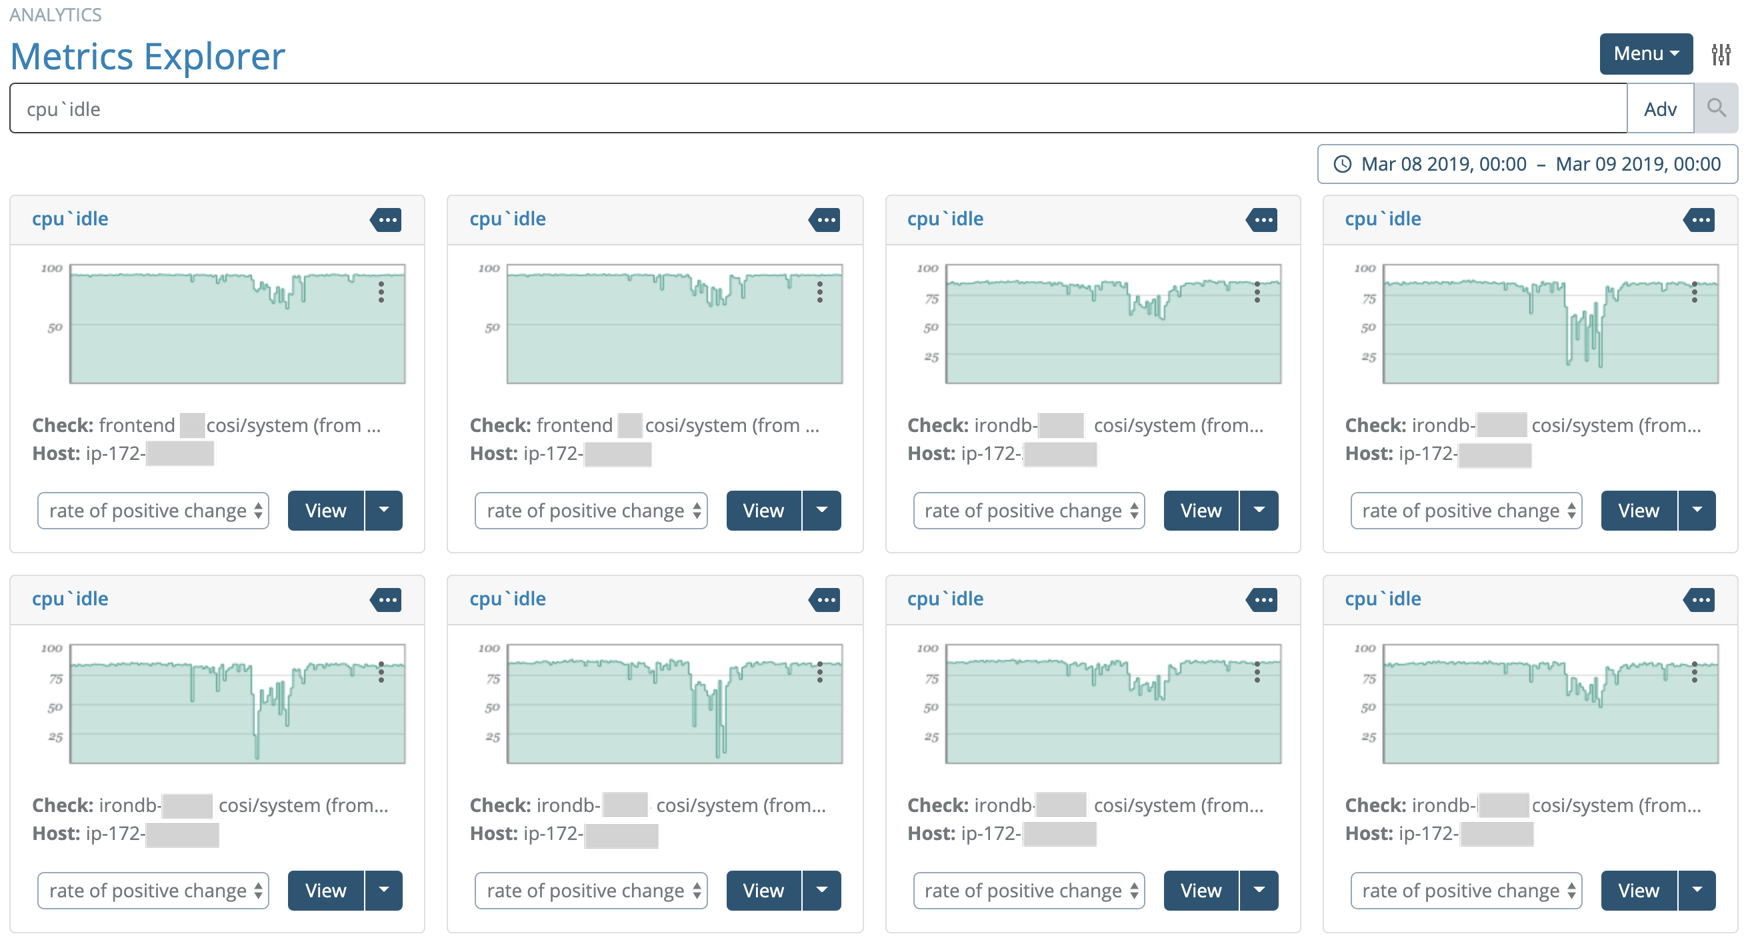 EC2 host CPU idle metrics -- note the decreased idle values where latency was observed